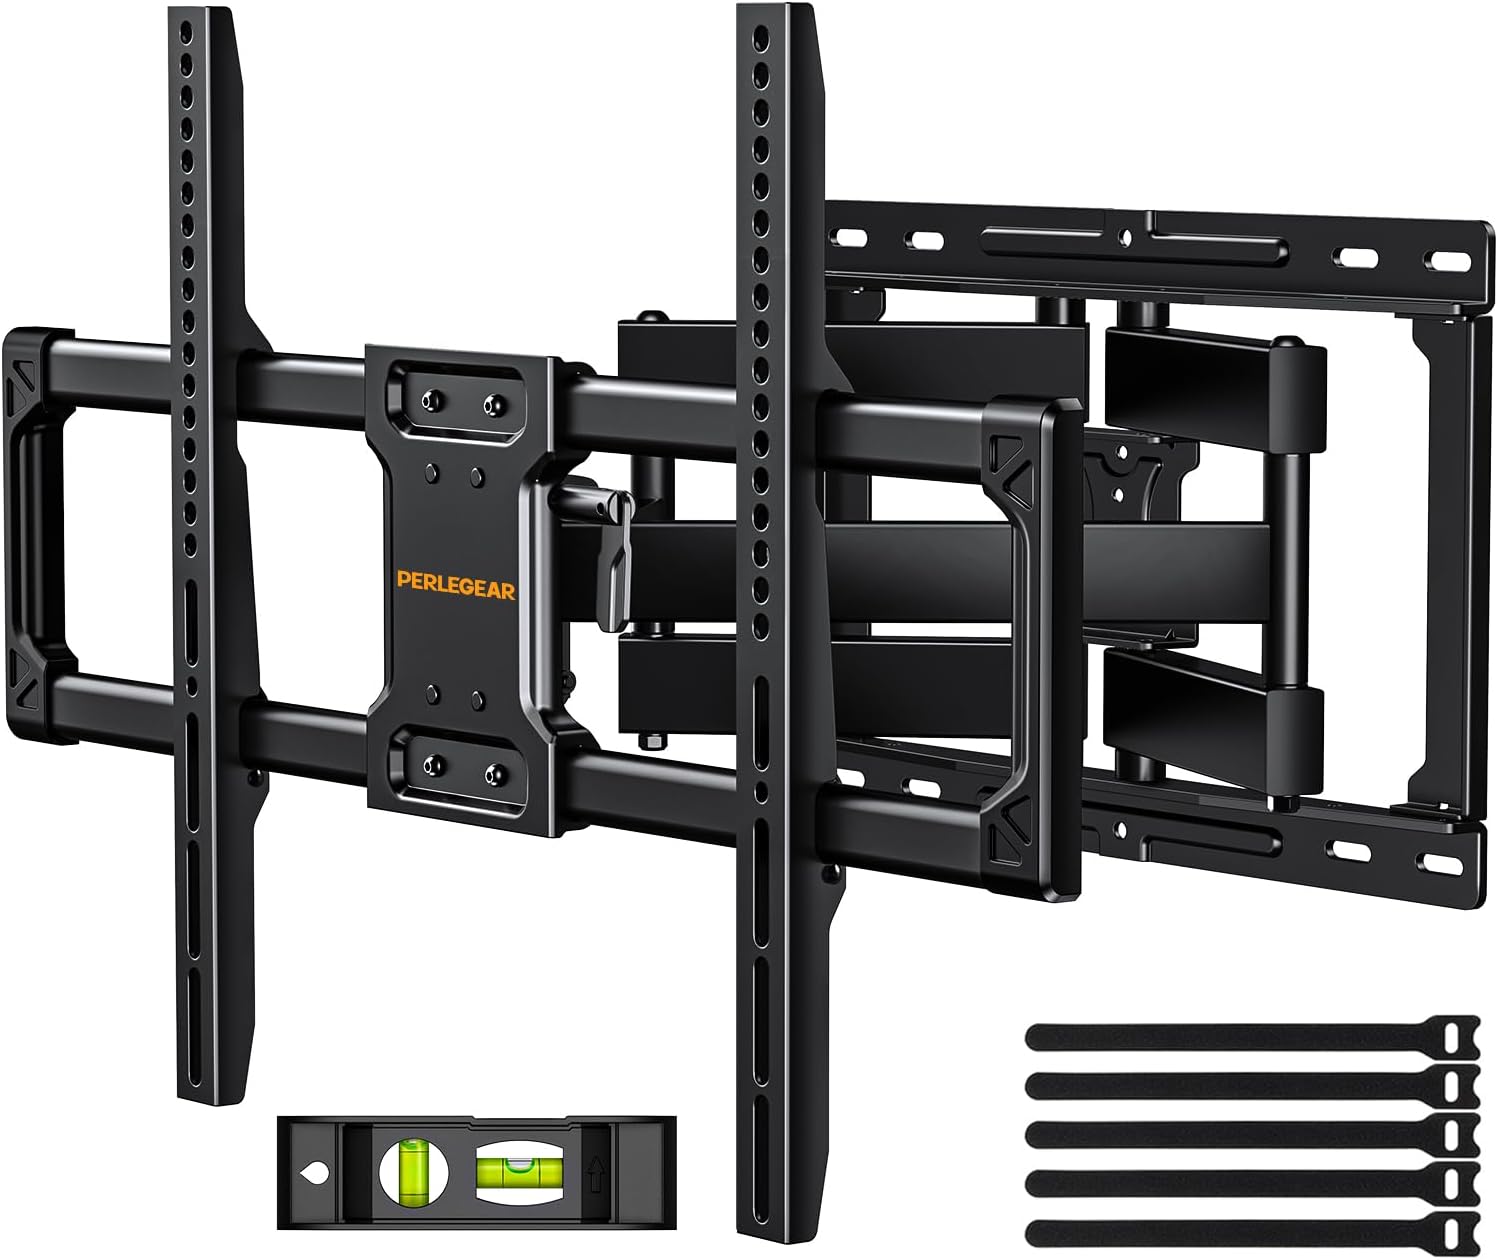 **Price Down** Prime Members: Perlegear Full Motion TV Wall Mount (for 37-82" TVs) $26.20 + Free Shipping